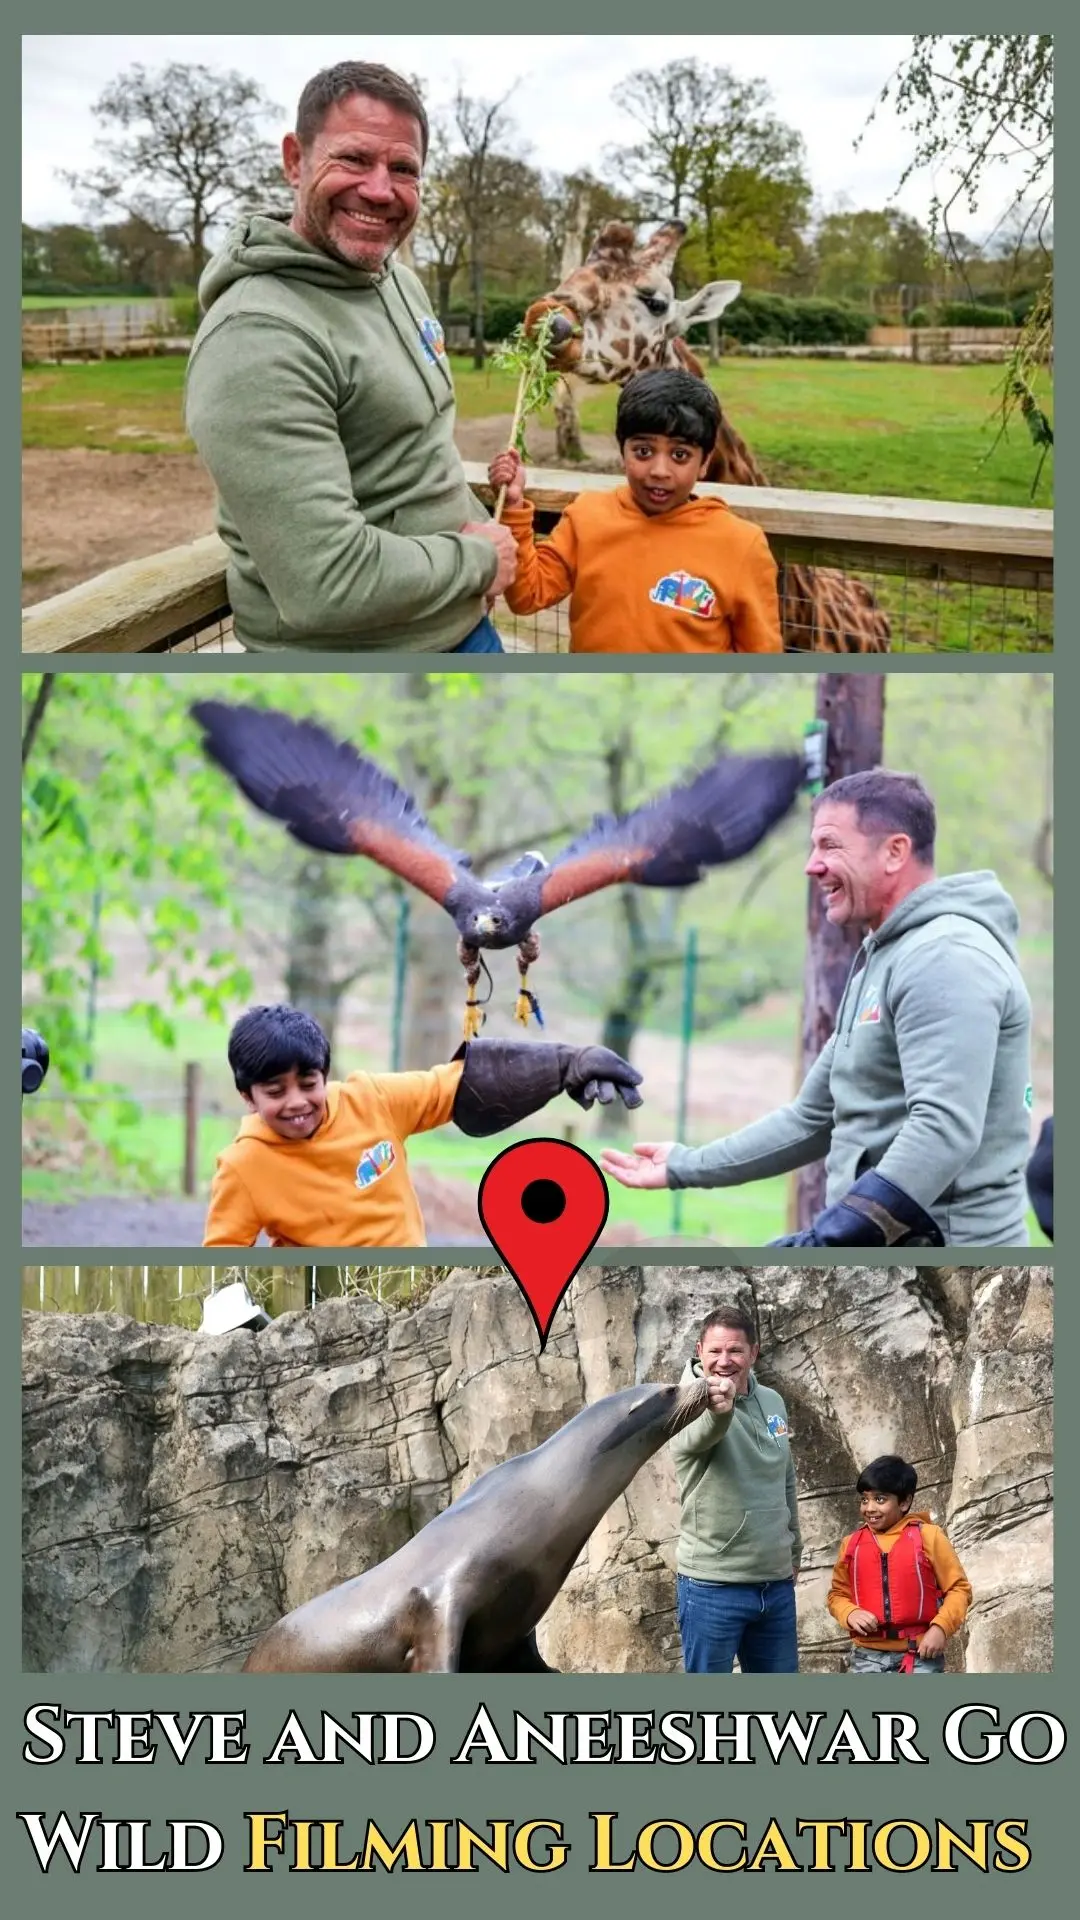 Steve and Aneeshwar Go Wild Filming Locations